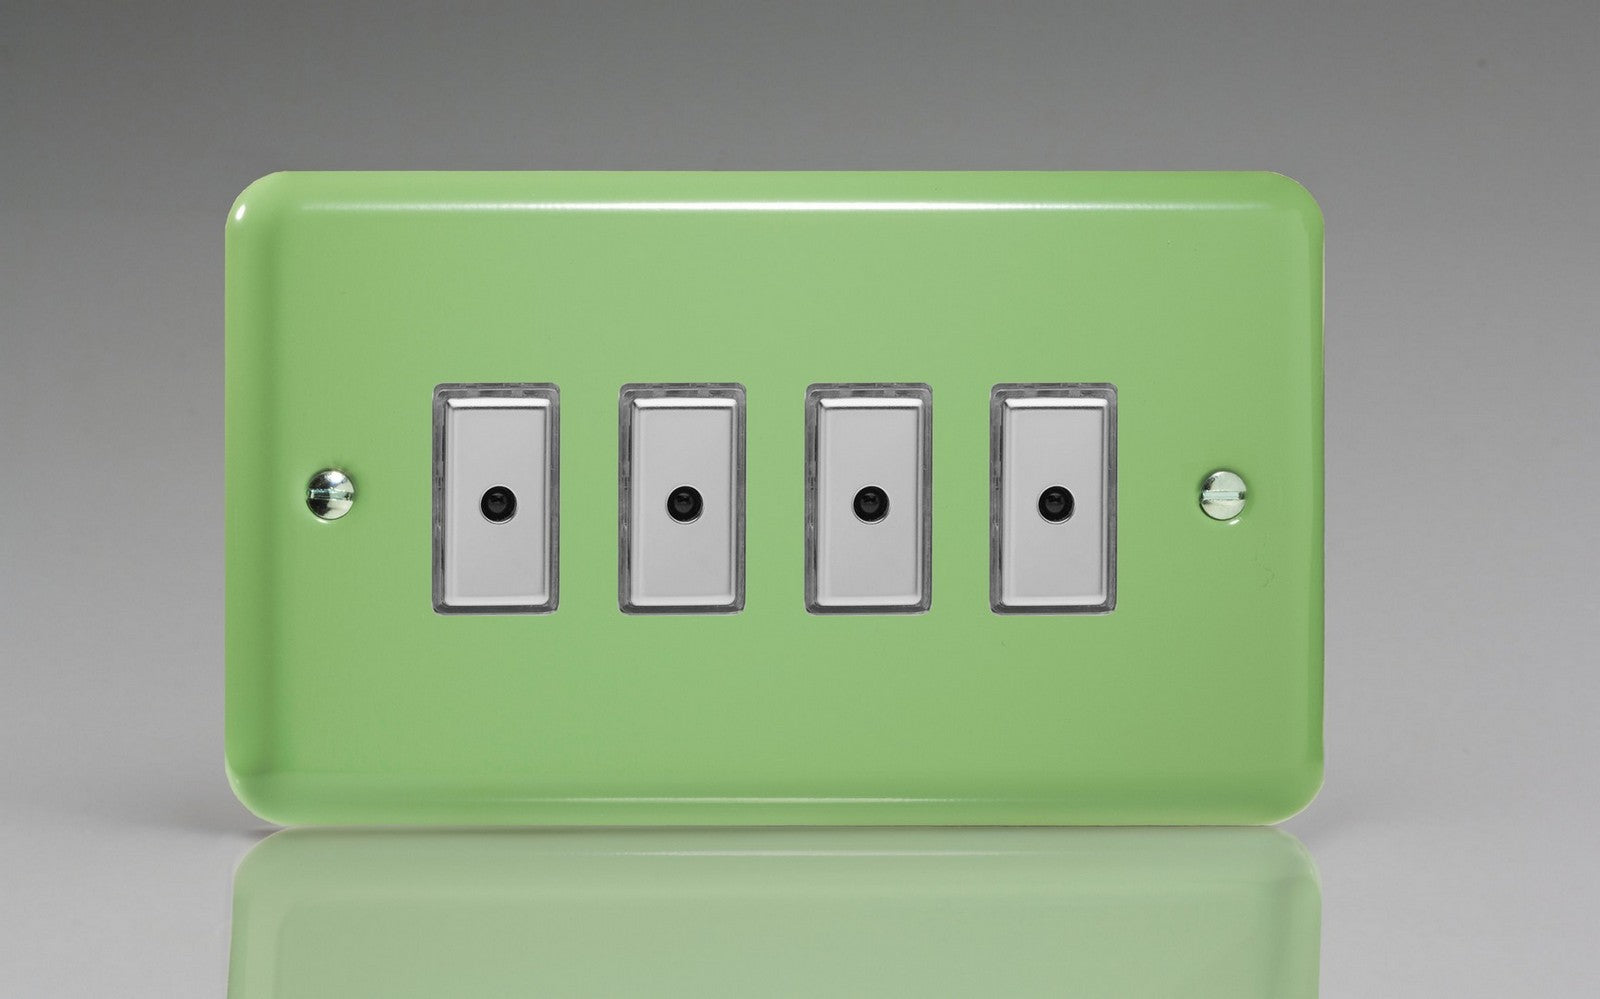 Varilight JYE104.BG Lily Beryl Green 4-Gang Multi-Way Remote/Tactile Touch Control Master LED Dimmer 4 x 0-100W (1-10 LEDs)